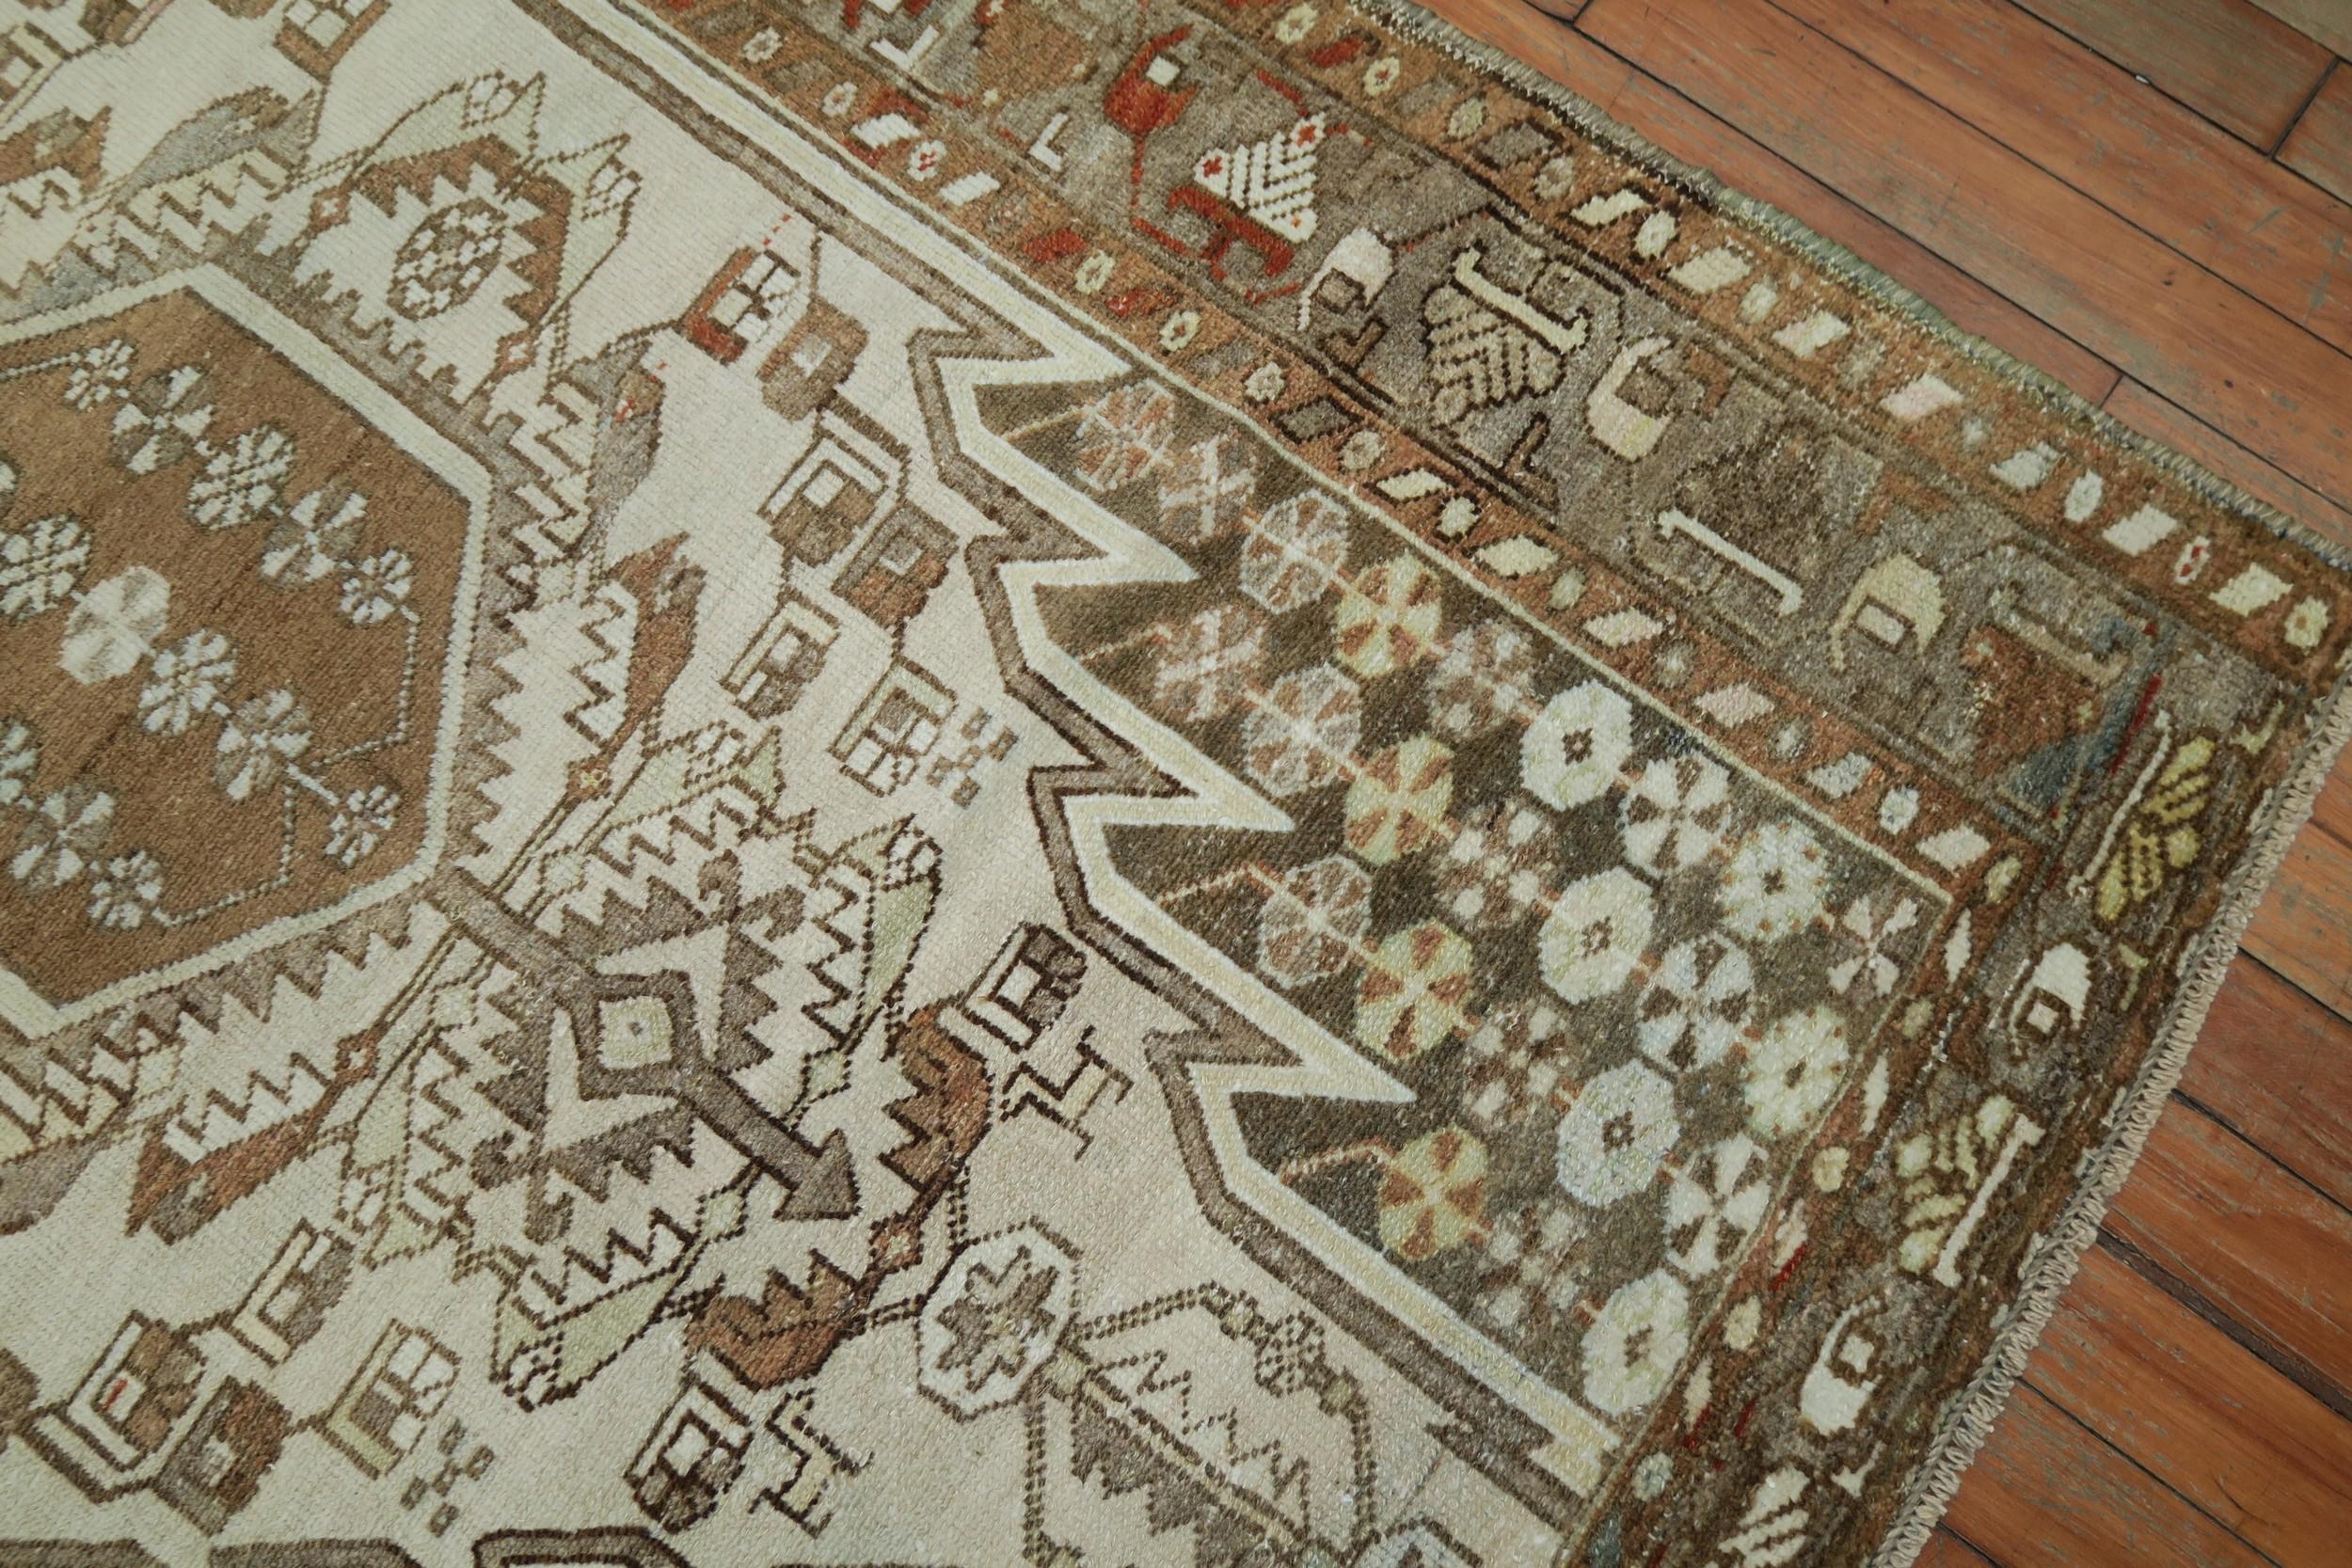 A small size early 20th-century Persian Malayer mazlagan rug 

Size 3'5